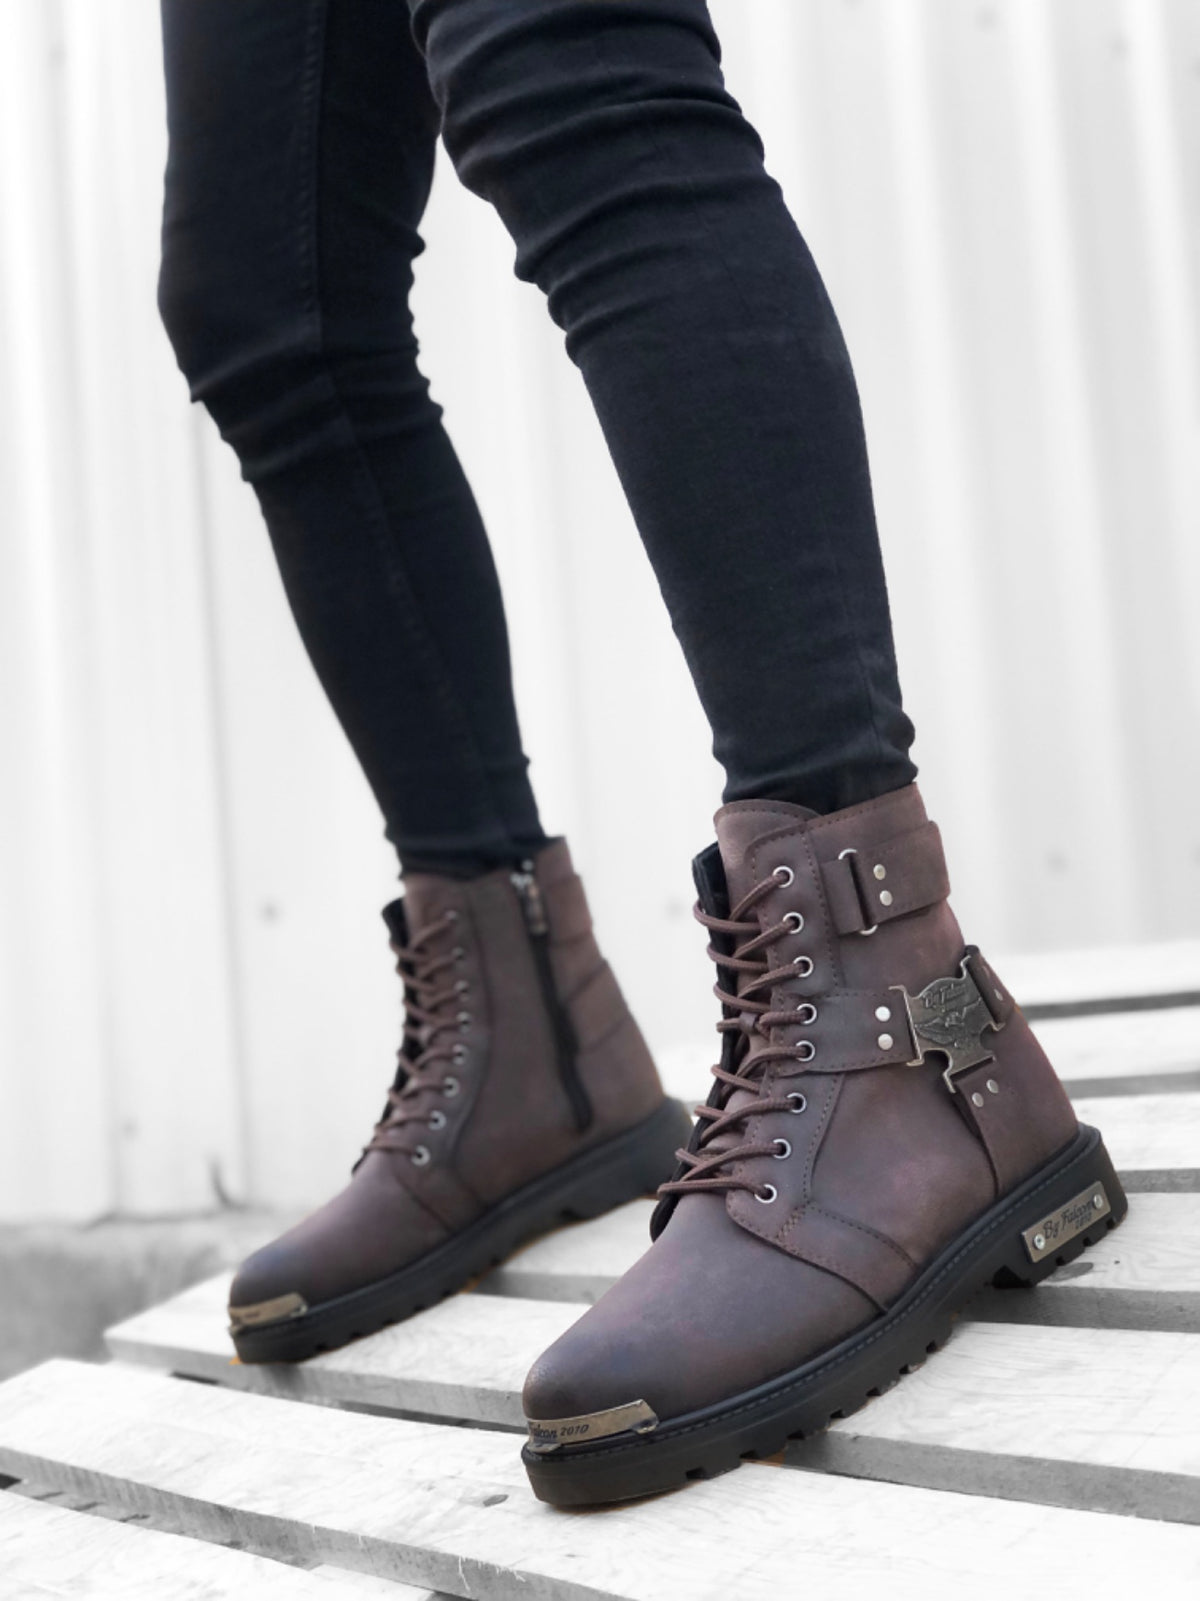 BA0080 Gladiator Men's Classic Sport Classic Ankle Ankle Boots With Zipper Buckle Brown - STREETMODE™